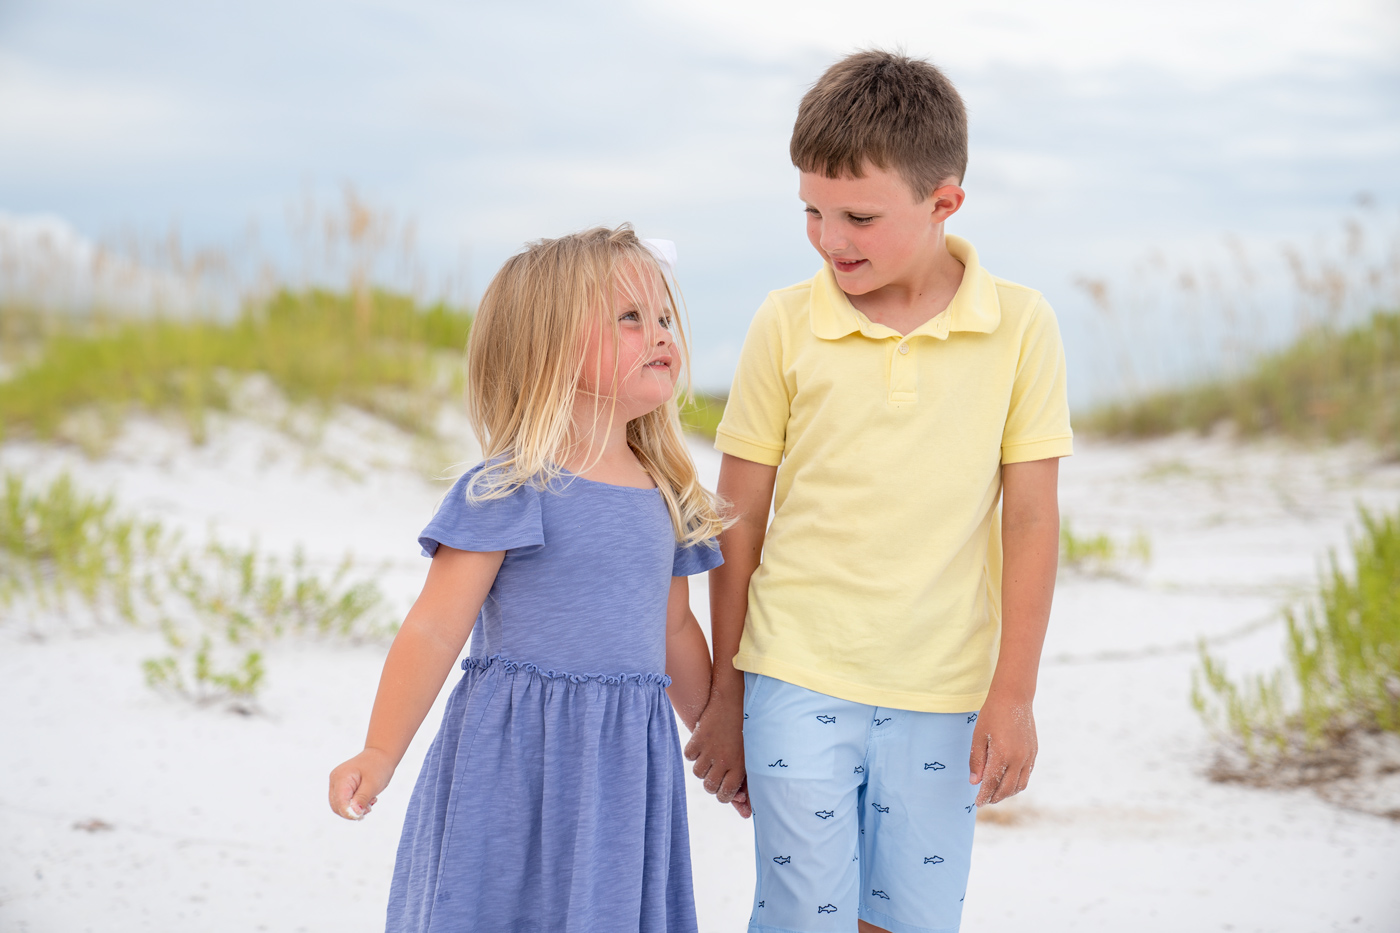 A boy and girl holding hands on the beach